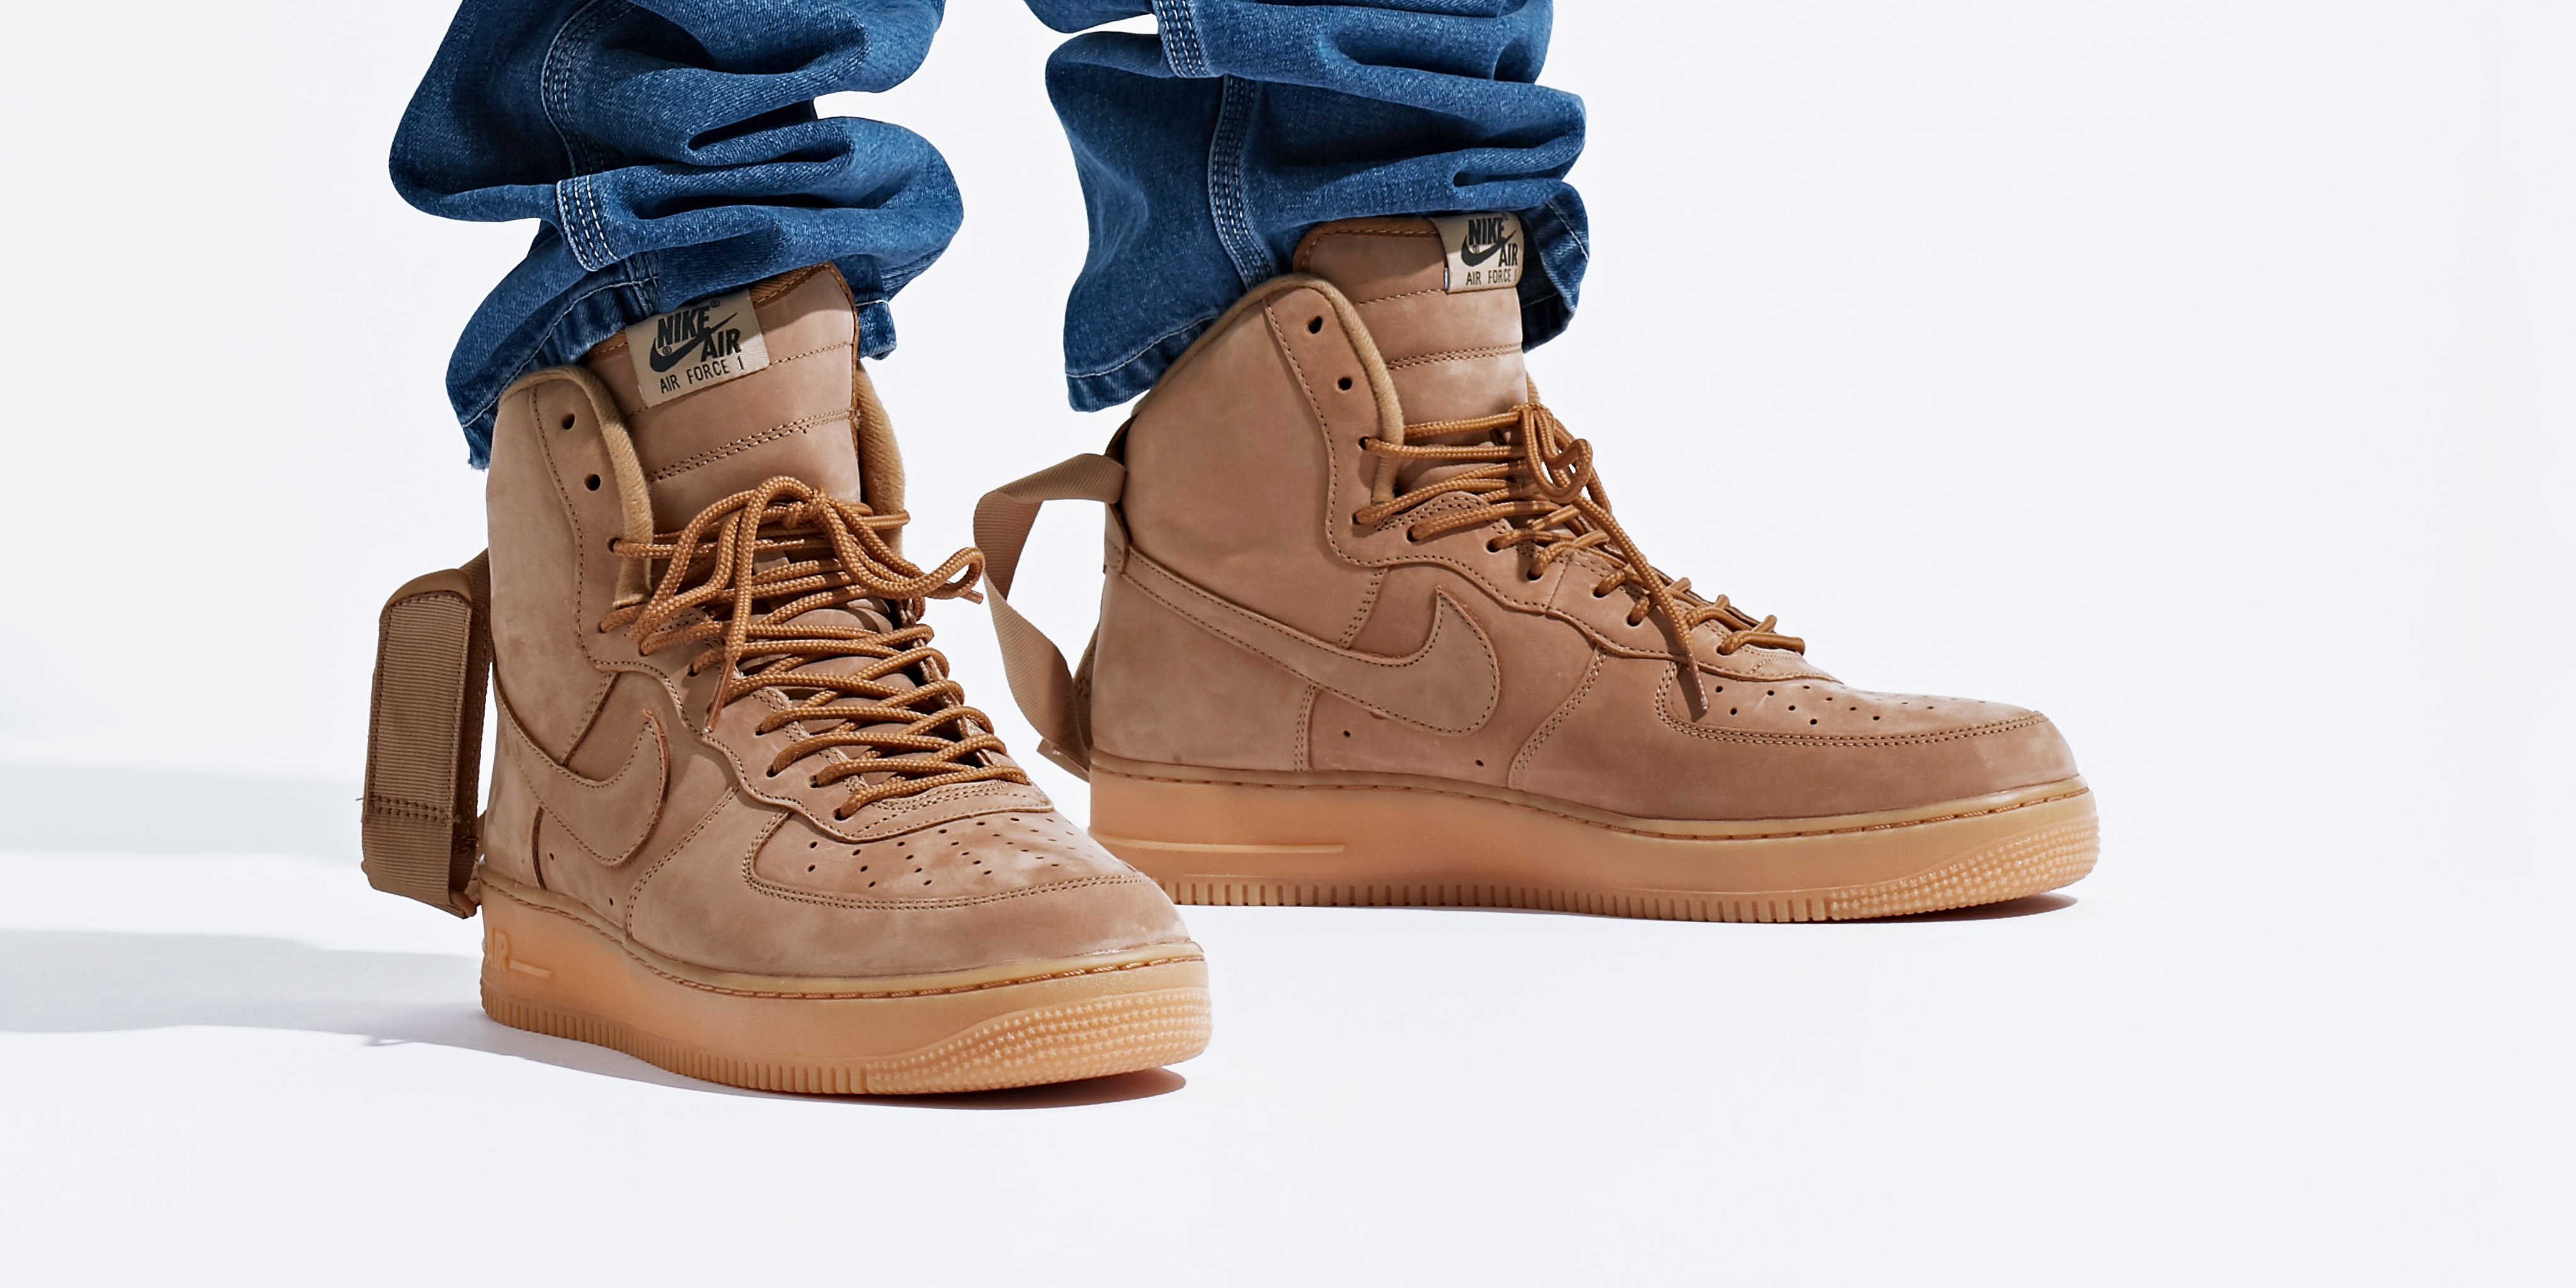 baas vasthoudend Promoten SNS on Twitter: "The Nike Air Force 1 High “Flax” aka “Wheat” is available  to buy online now — Find your size here: https://t.co/tuk6LSlOad  https://t.co/7JW7Afz9ZC" / Twitter